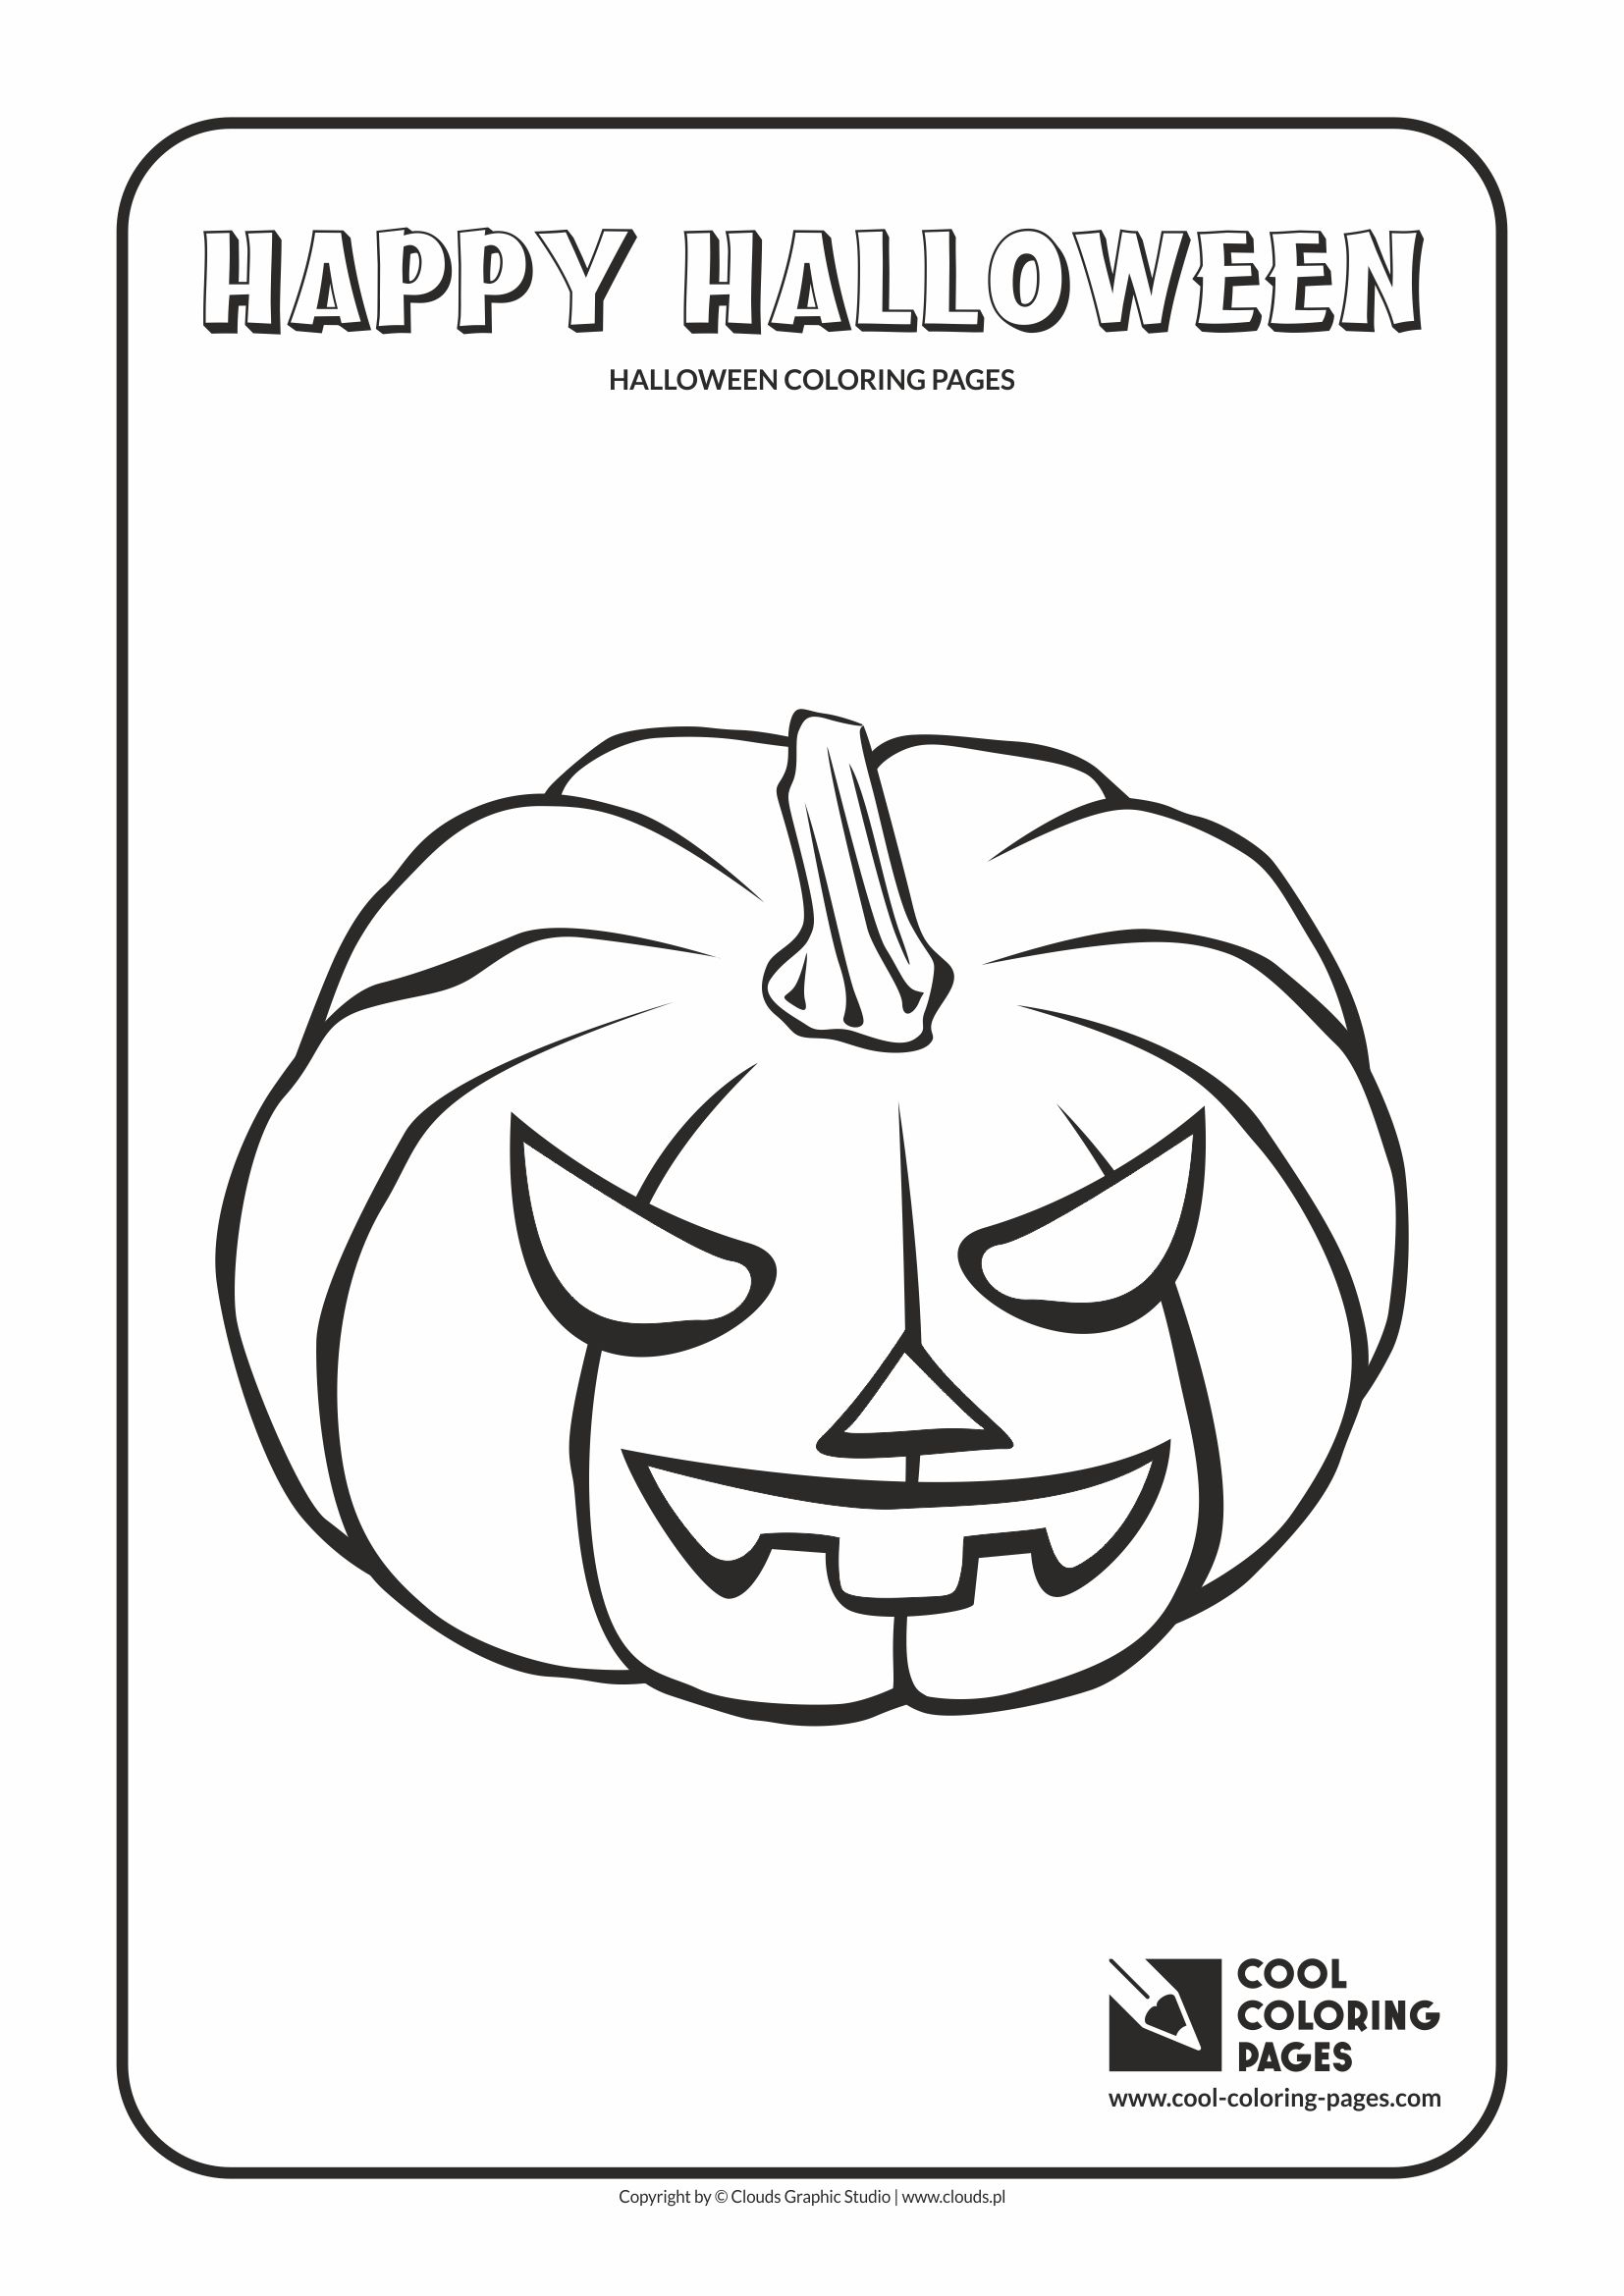 Cool Coloring Pages - Holidays / Halloween pumpkin no 3 / Coloring page with Halloween pumpkin no 3